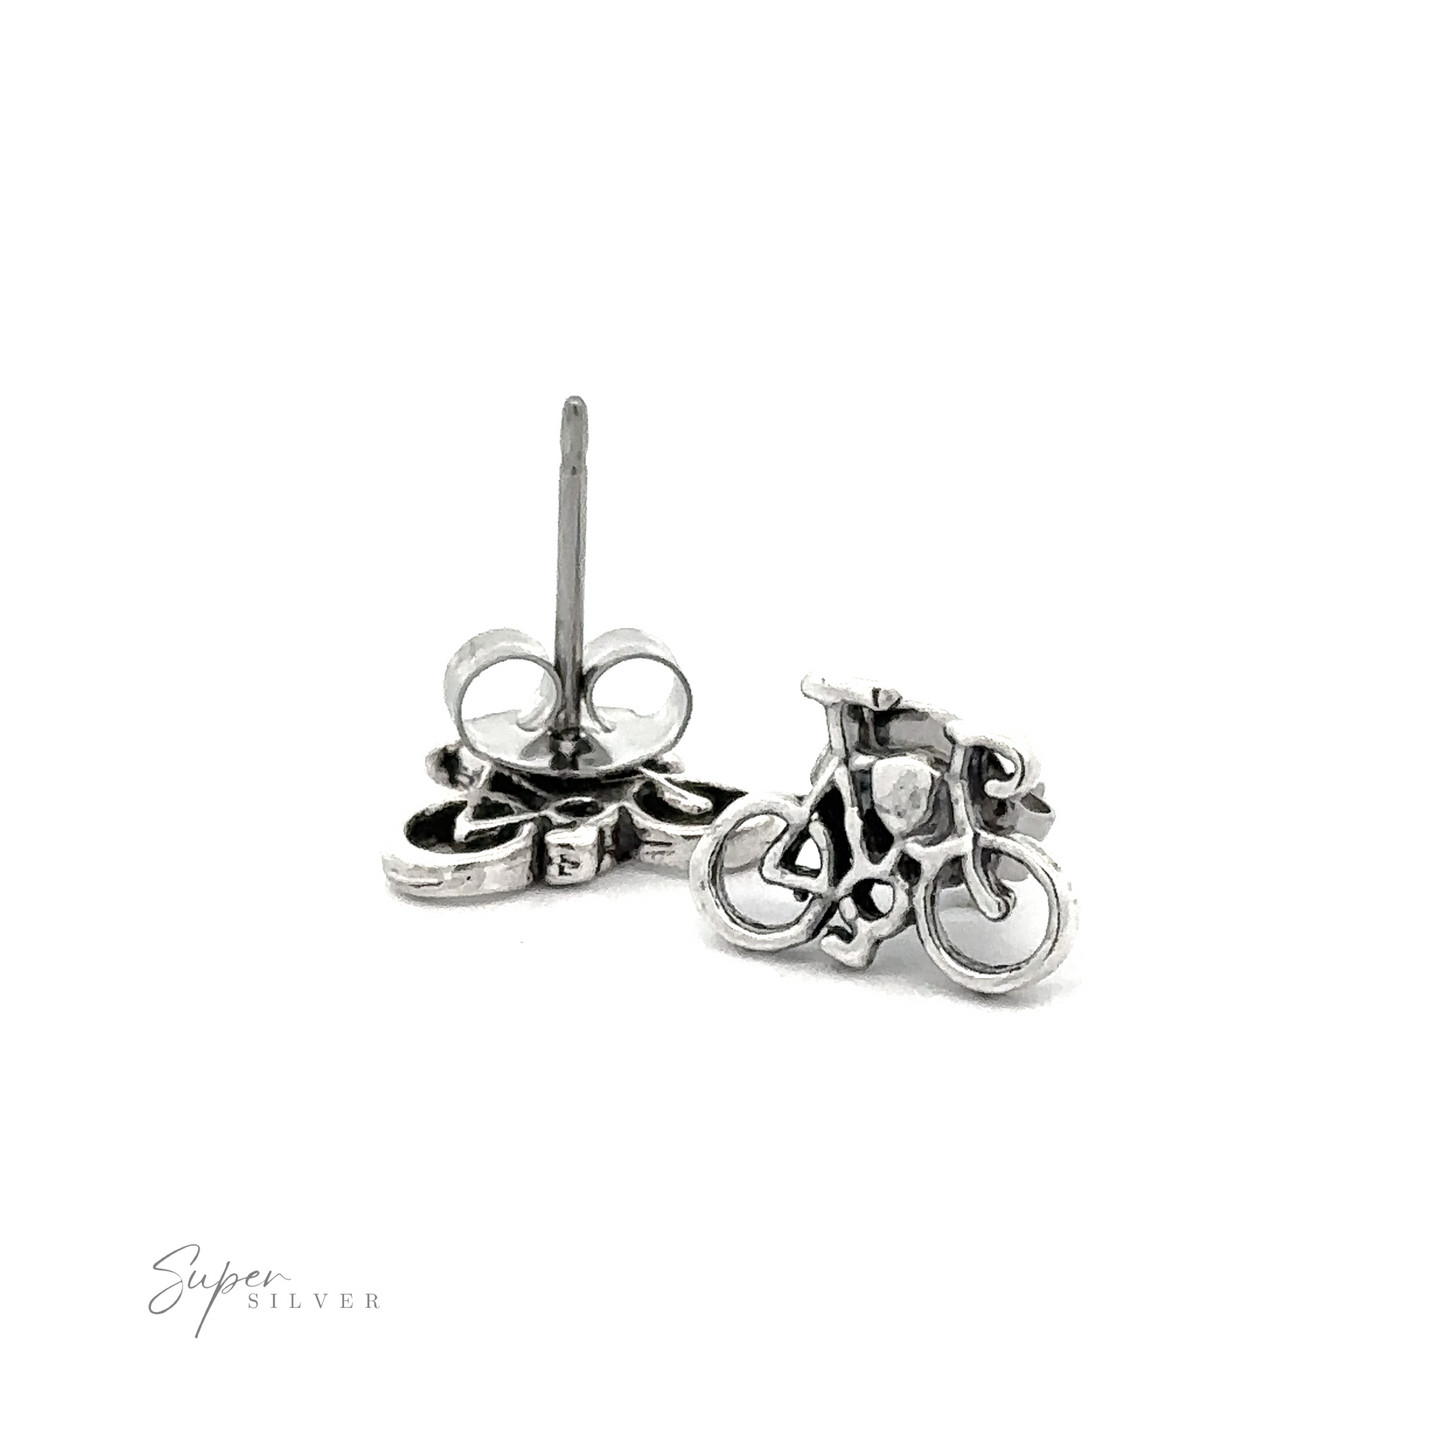 A pair of Bicycle Studs on a white background.